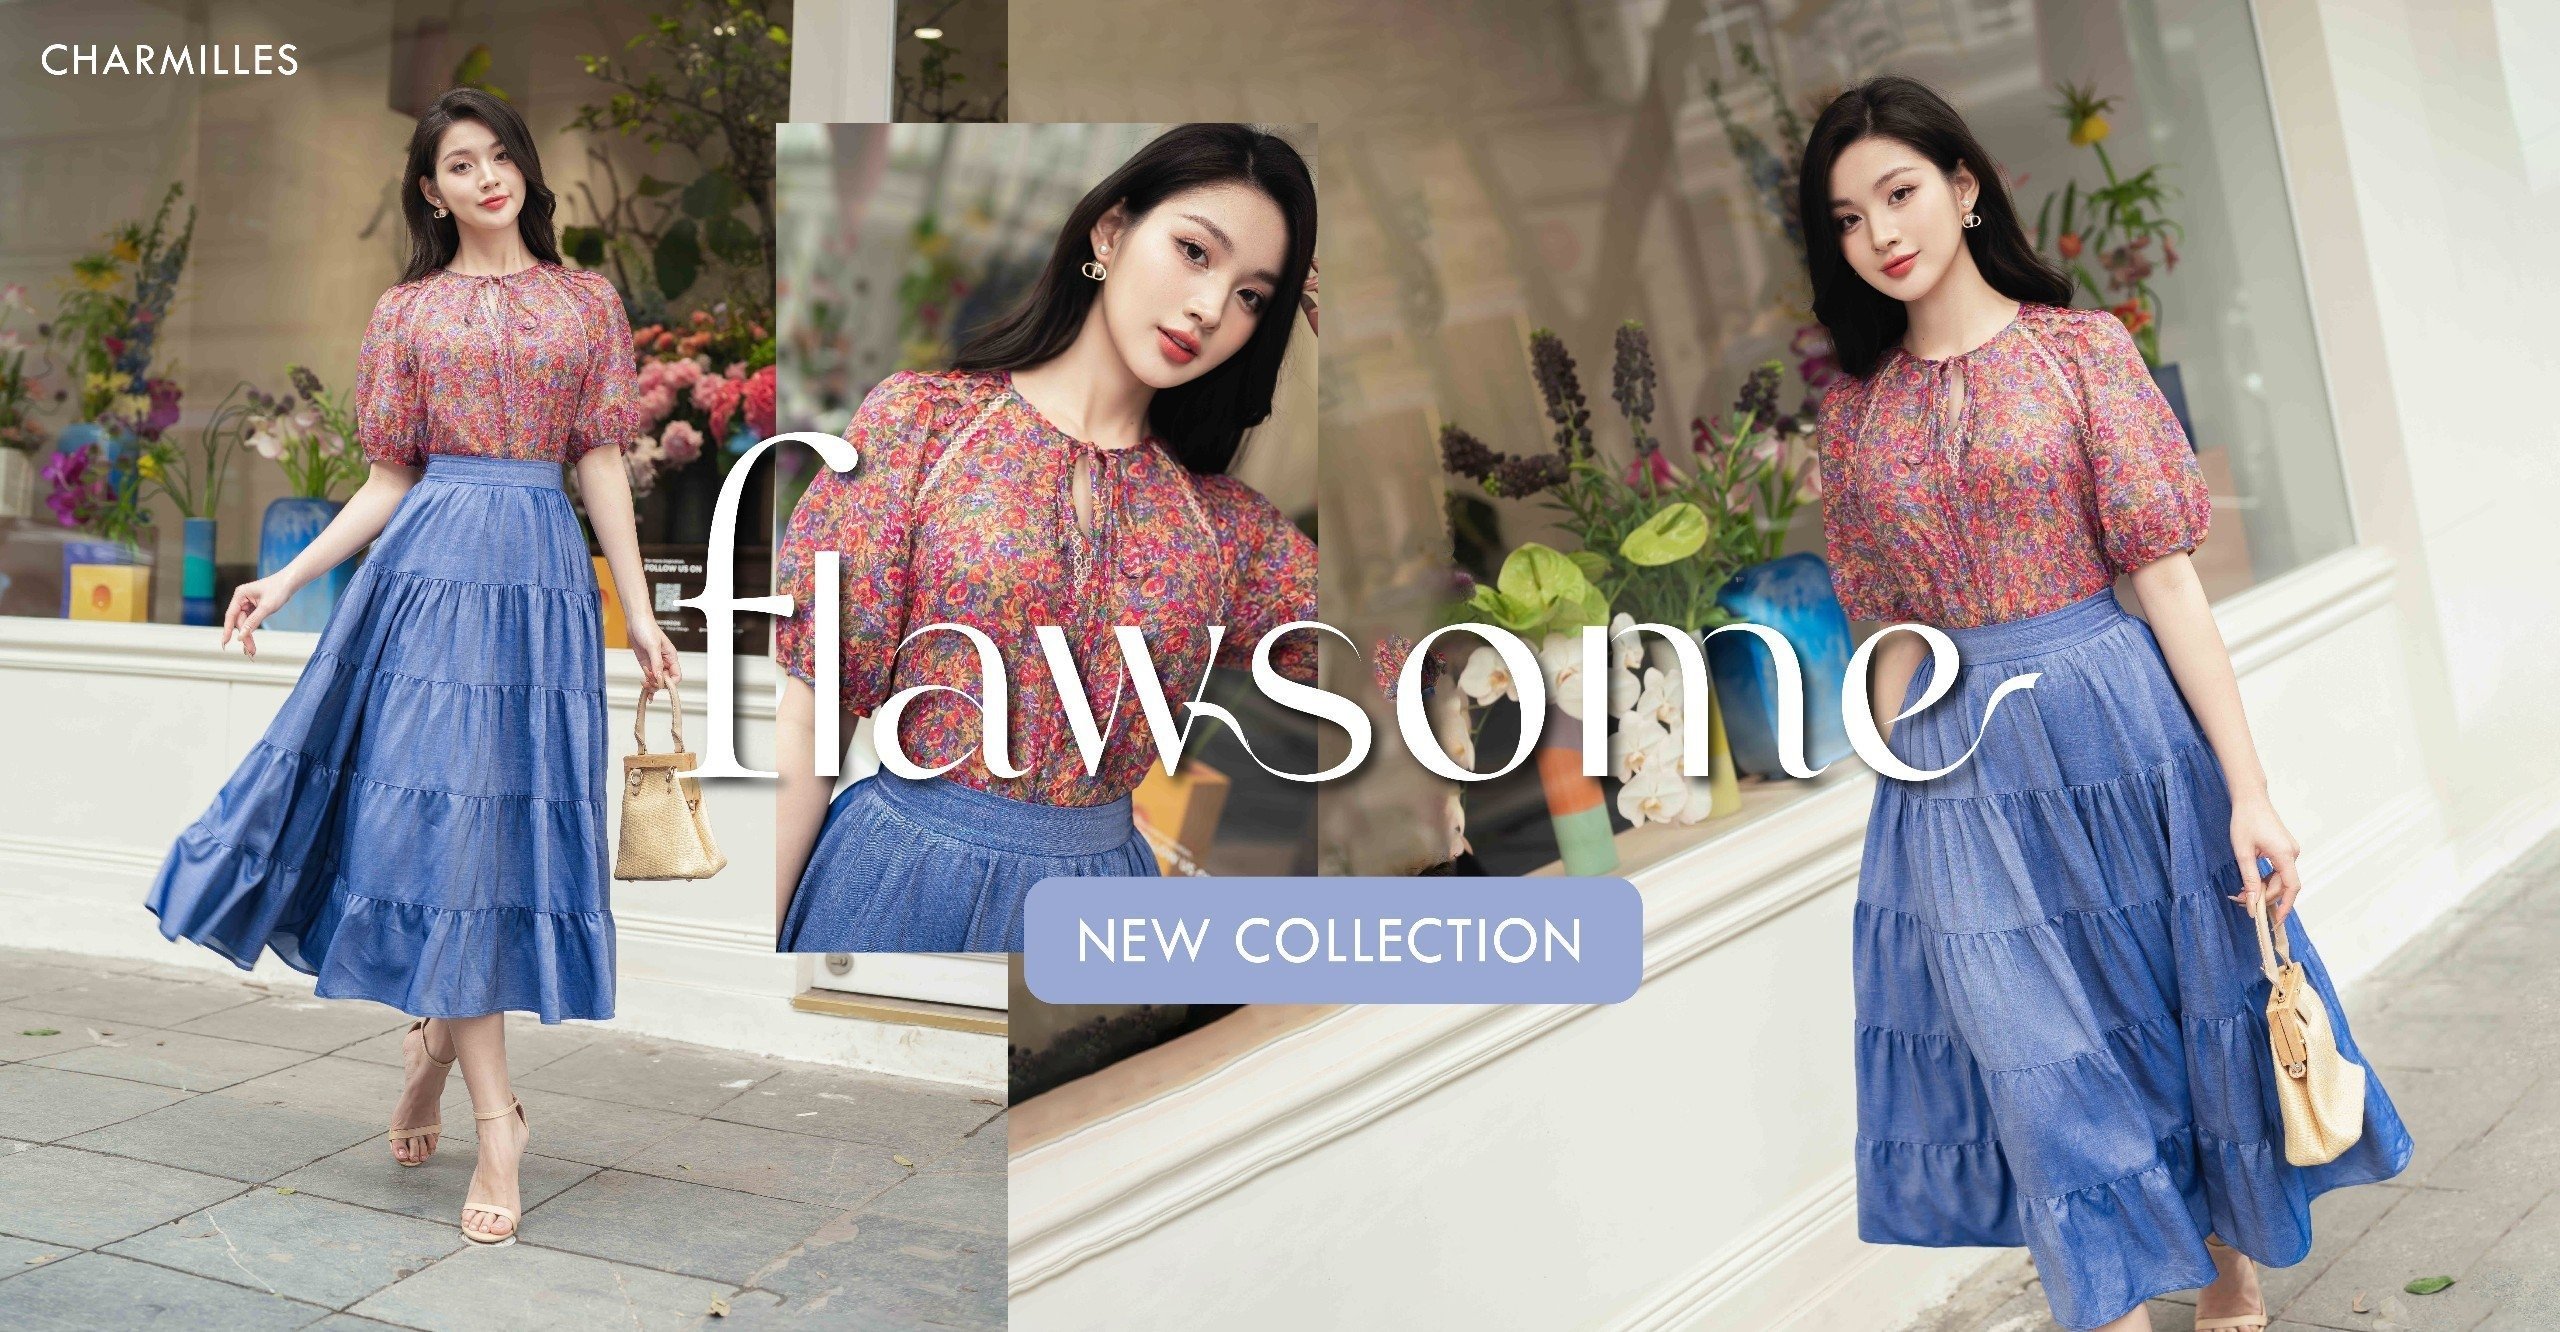 NEW COLLECTION - FLAWSOME